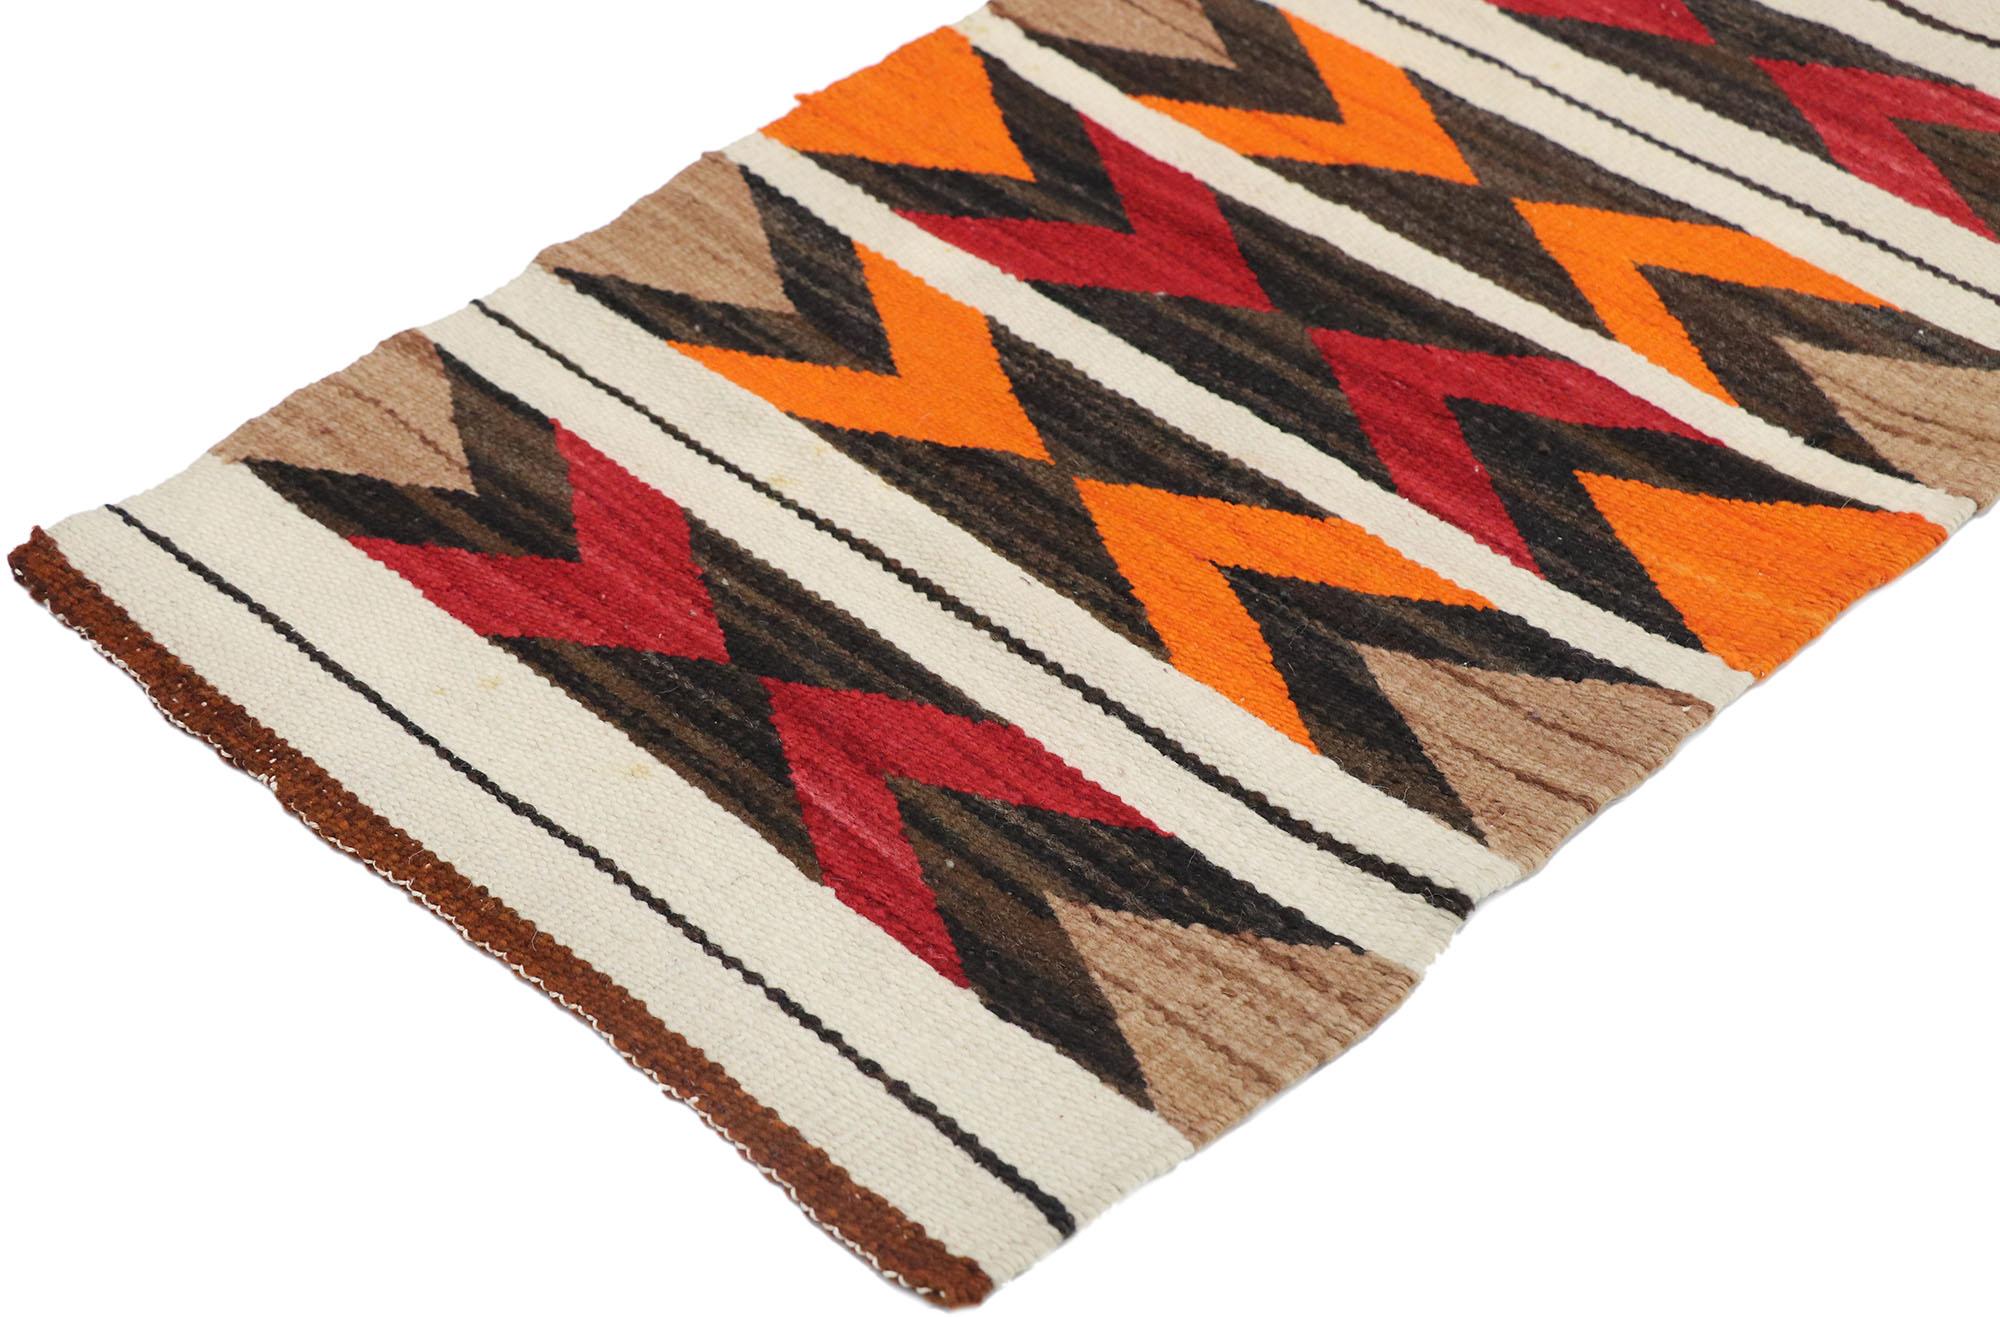 77779, vintage Navajo Kilim rug with Two Grey Hills style. With its bold expressive design, incredible detail and texture, this hand-woven wool vintage Navajo Kilim rug is a captivating vision of woven beauty highlighting Native American style with